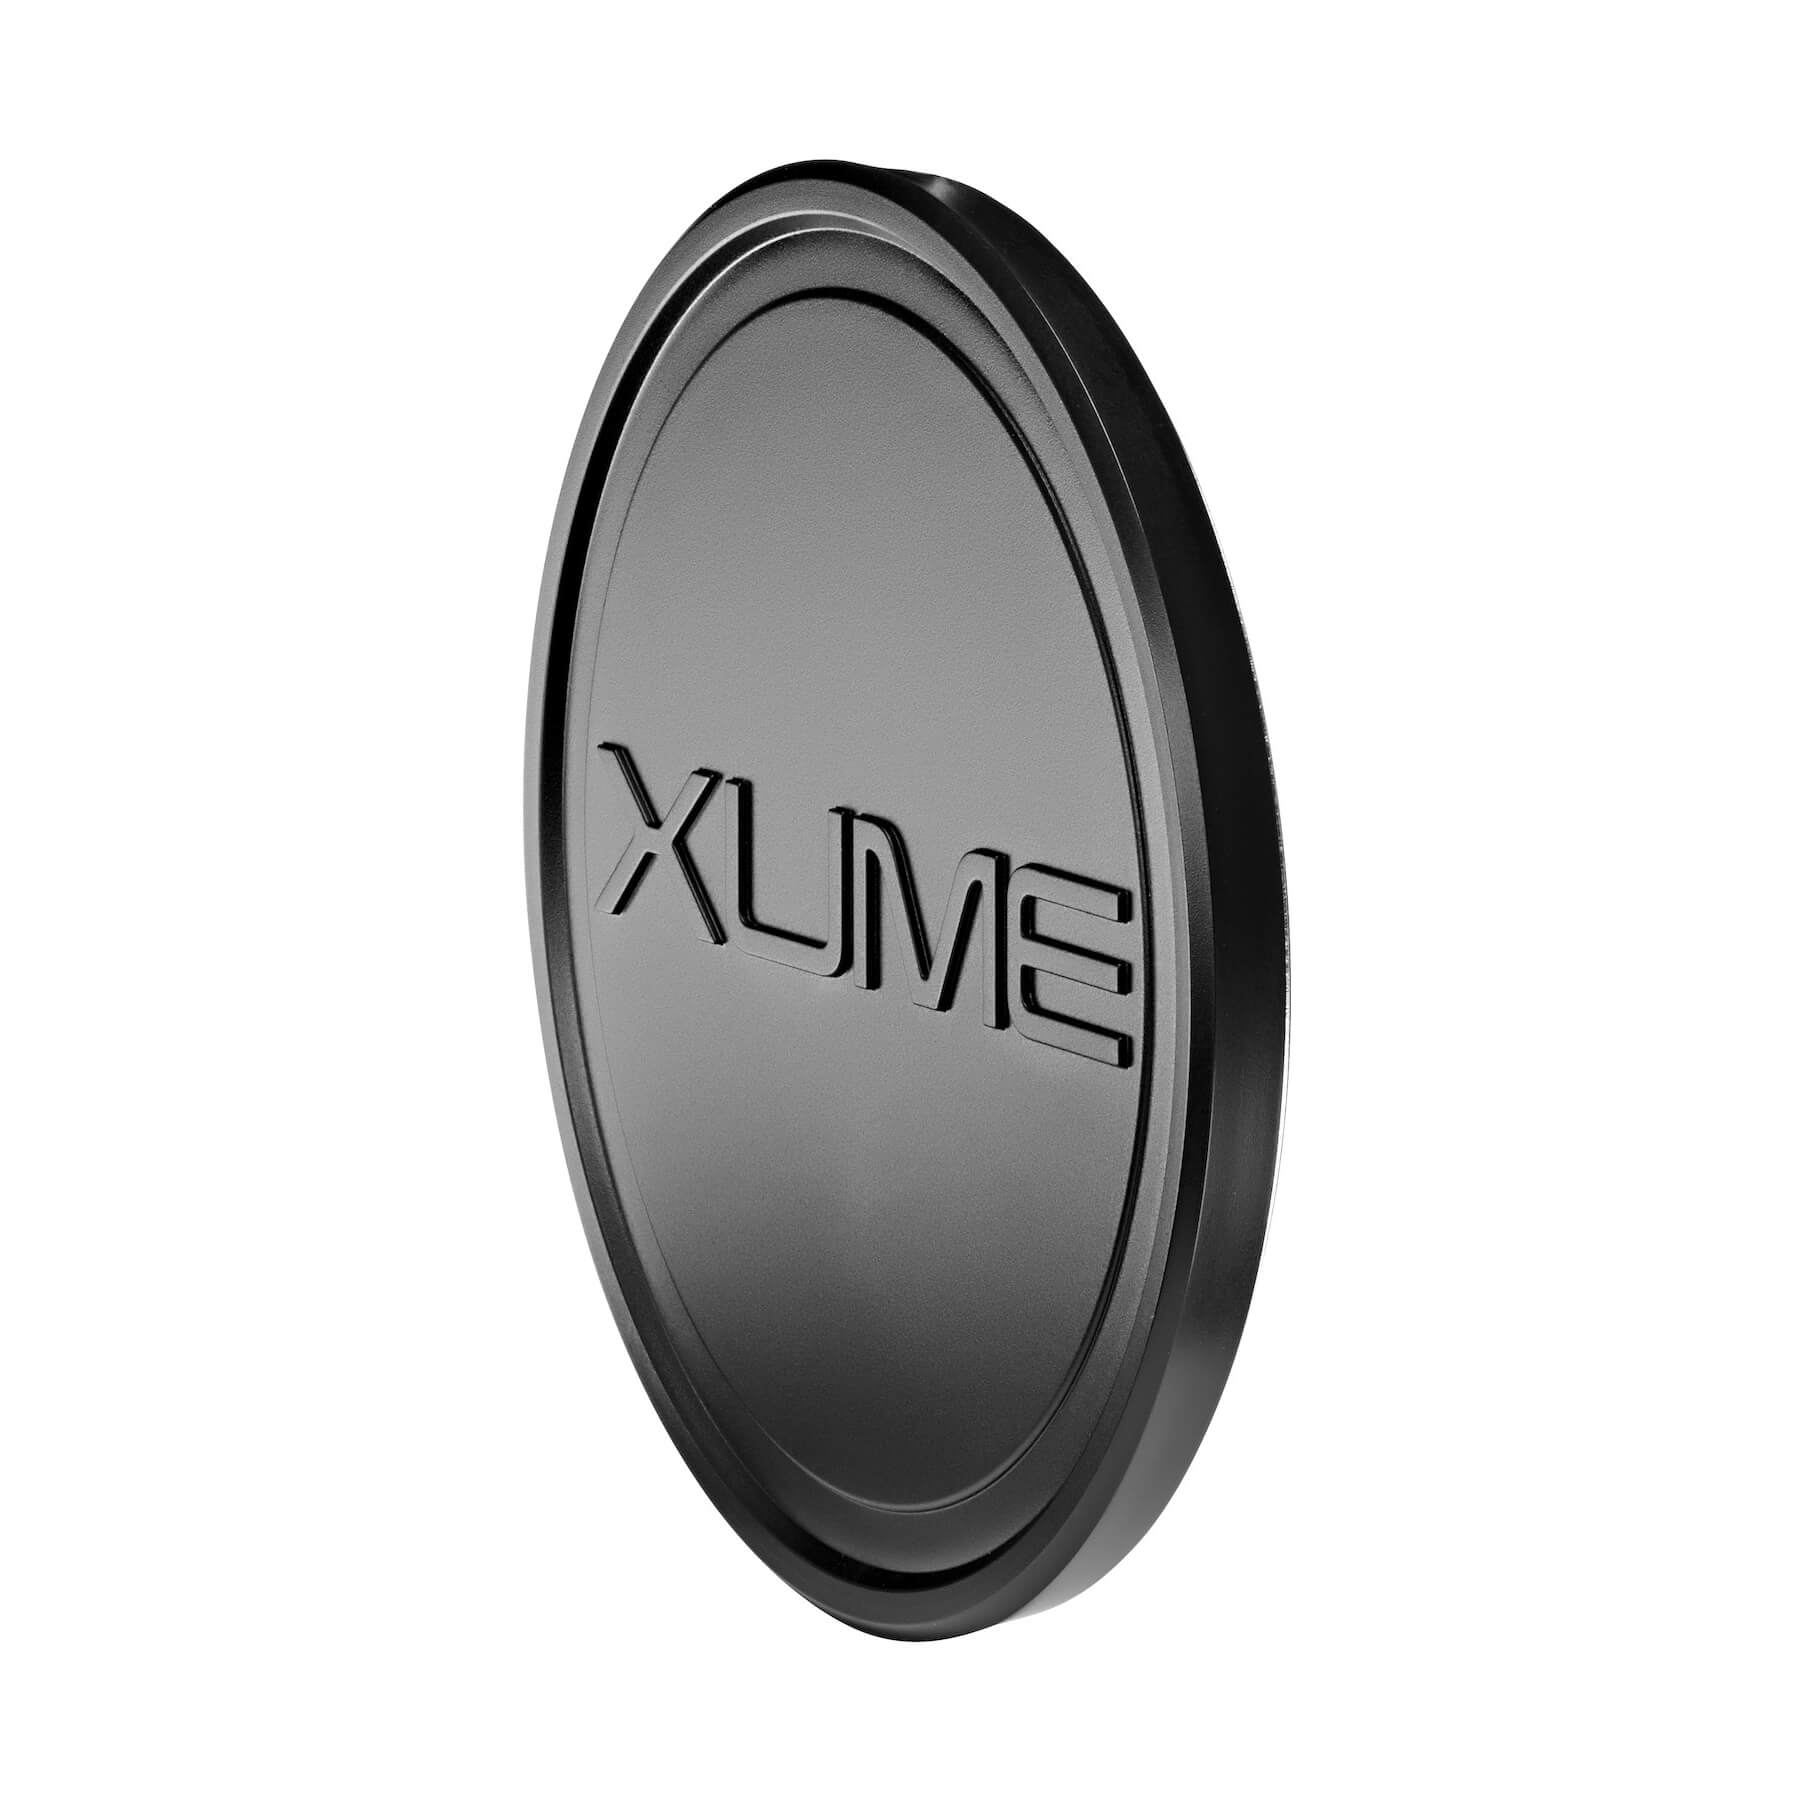 MANFROTTO Lens Adapter XUME 52 mm